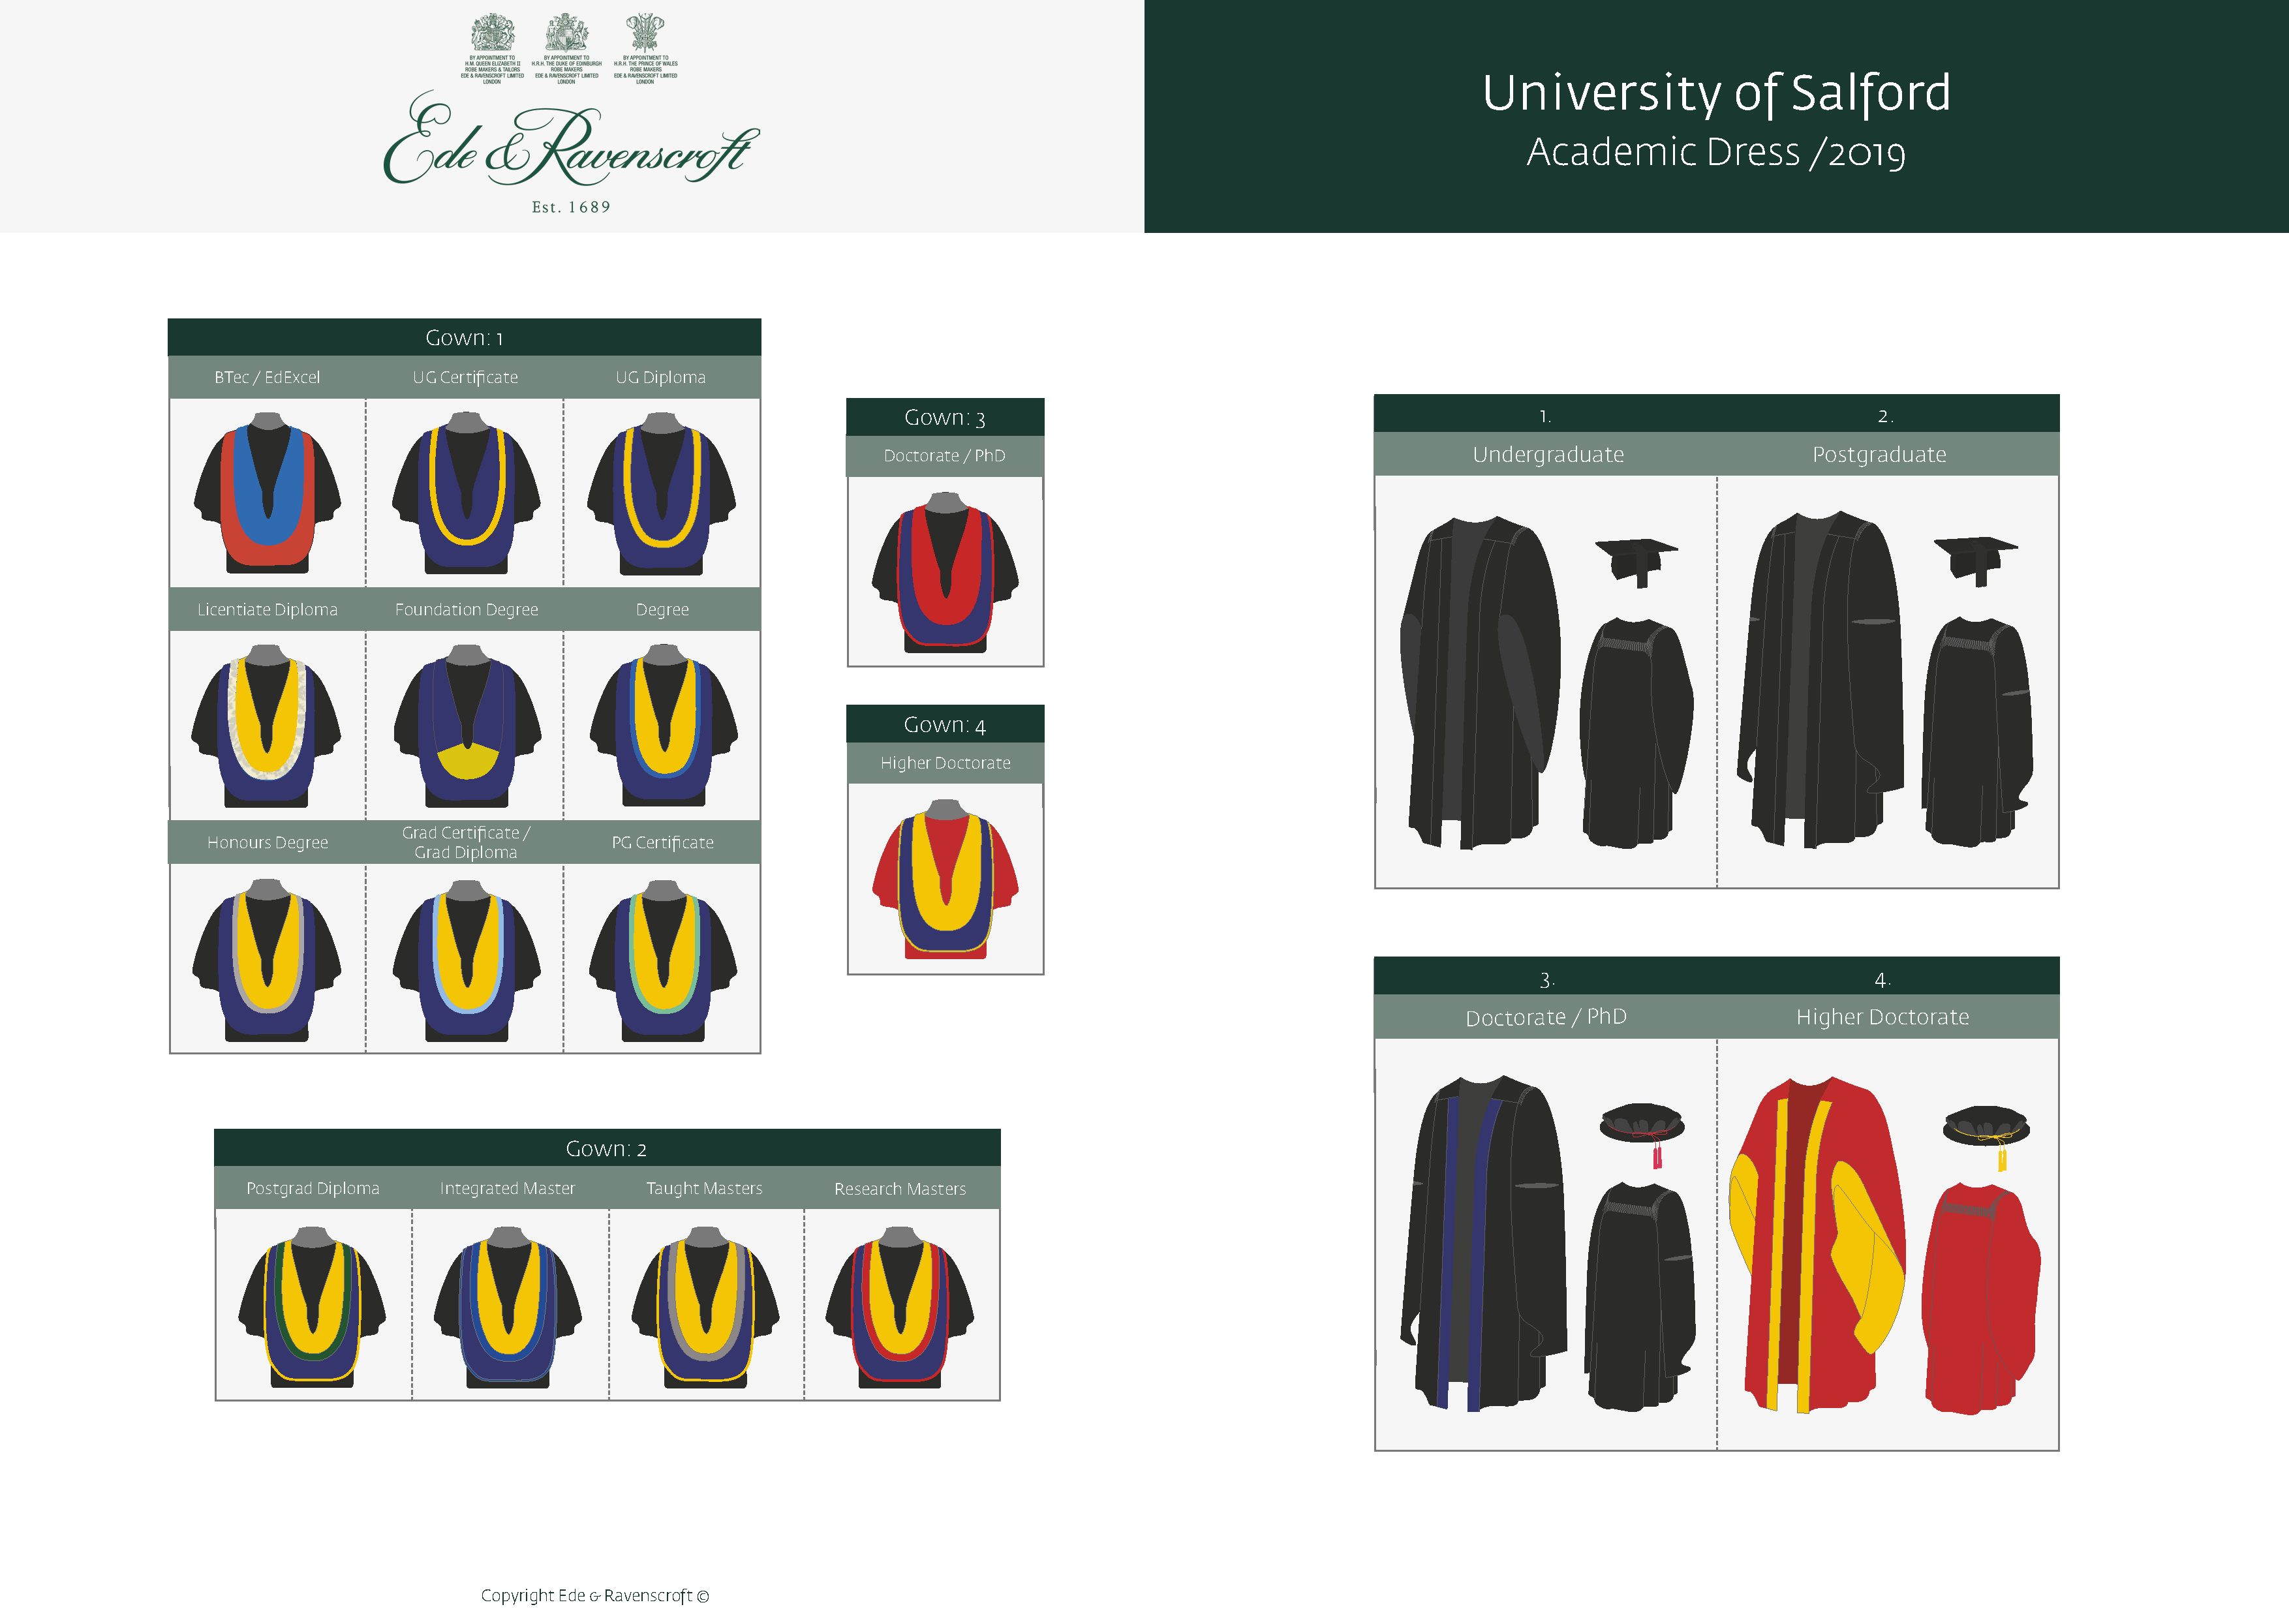 Selection of robes appropriate to different degree awards